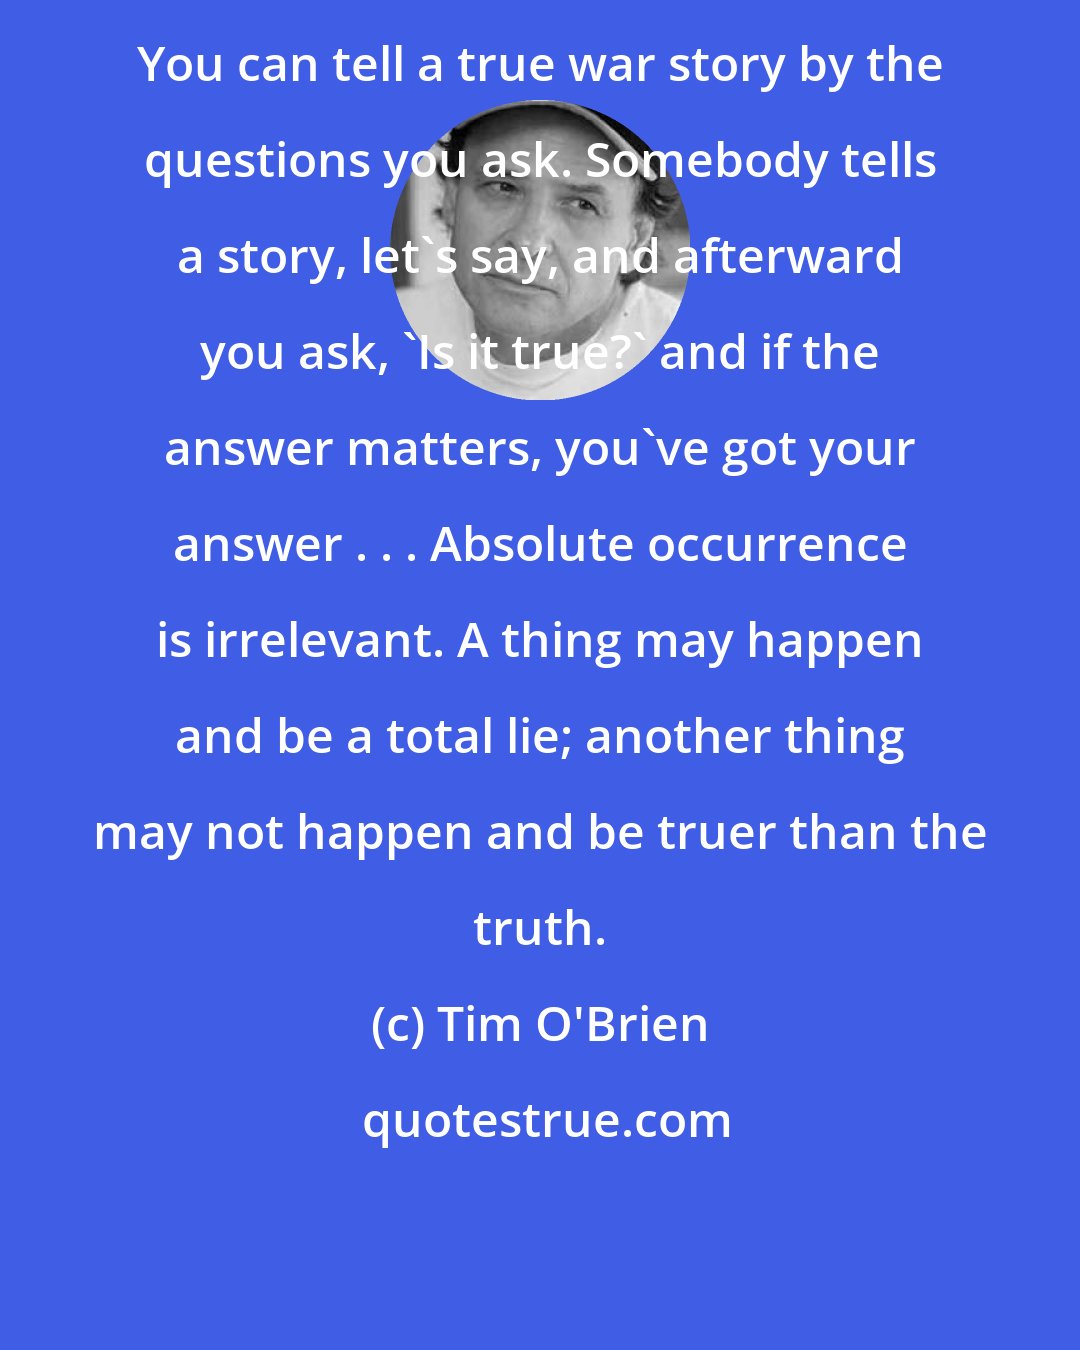 Tim O'Brien: You can tell a true war story by the questions you ask. Somebody tells a story, let's say, and afterward you ask, 'Is it true?' and if the answer matters, you've got your answer . . . Absolute occurrence is irrelevant. A thing may happen and be a total lie; another thing may not happen and be truer than the truth.